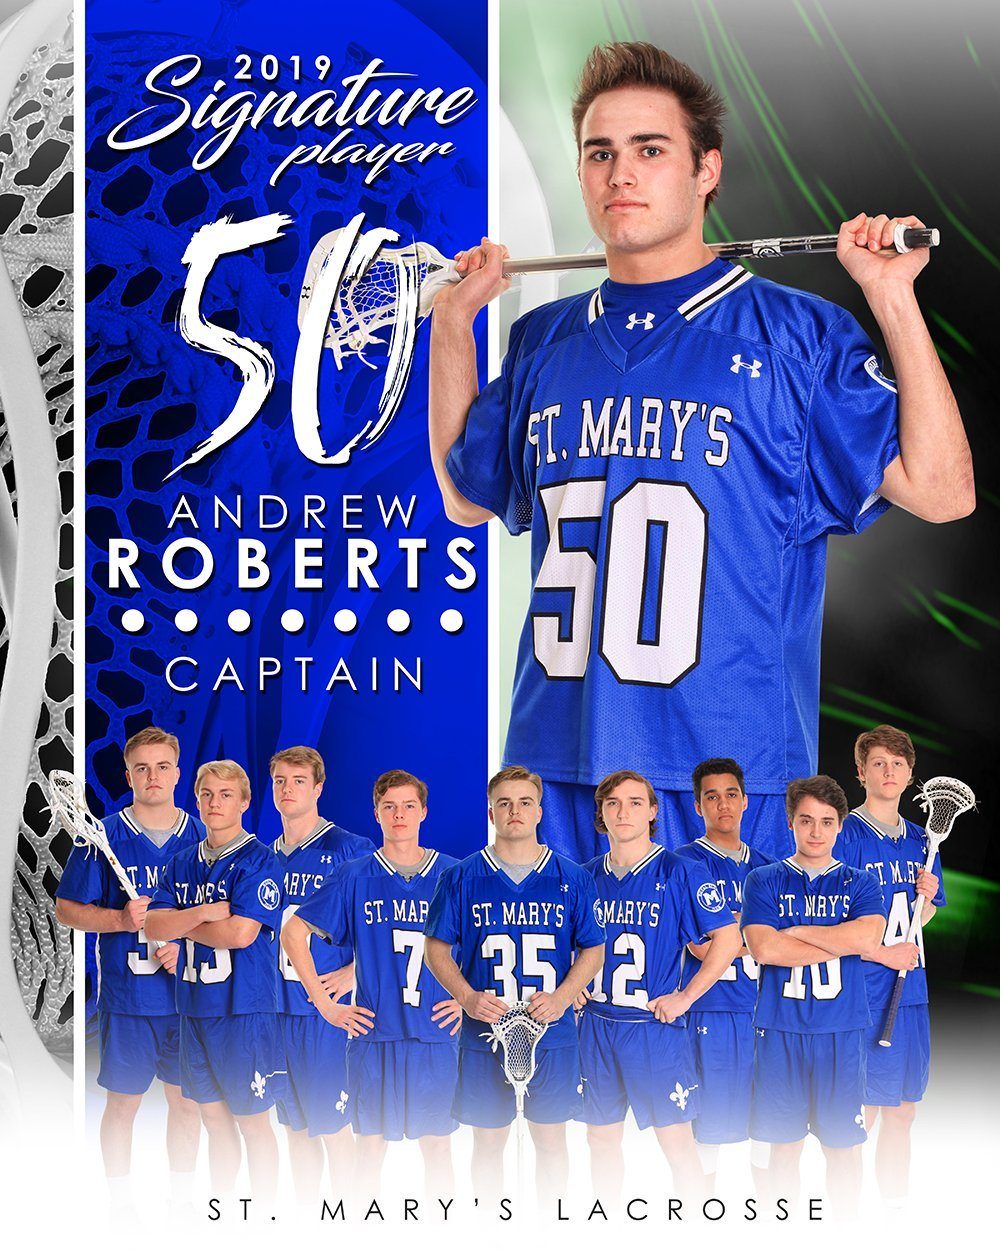 Lacrosse - v.1 - Signature Player - V T&I Poster/Banner-Photoshop Template - Photo Solutions